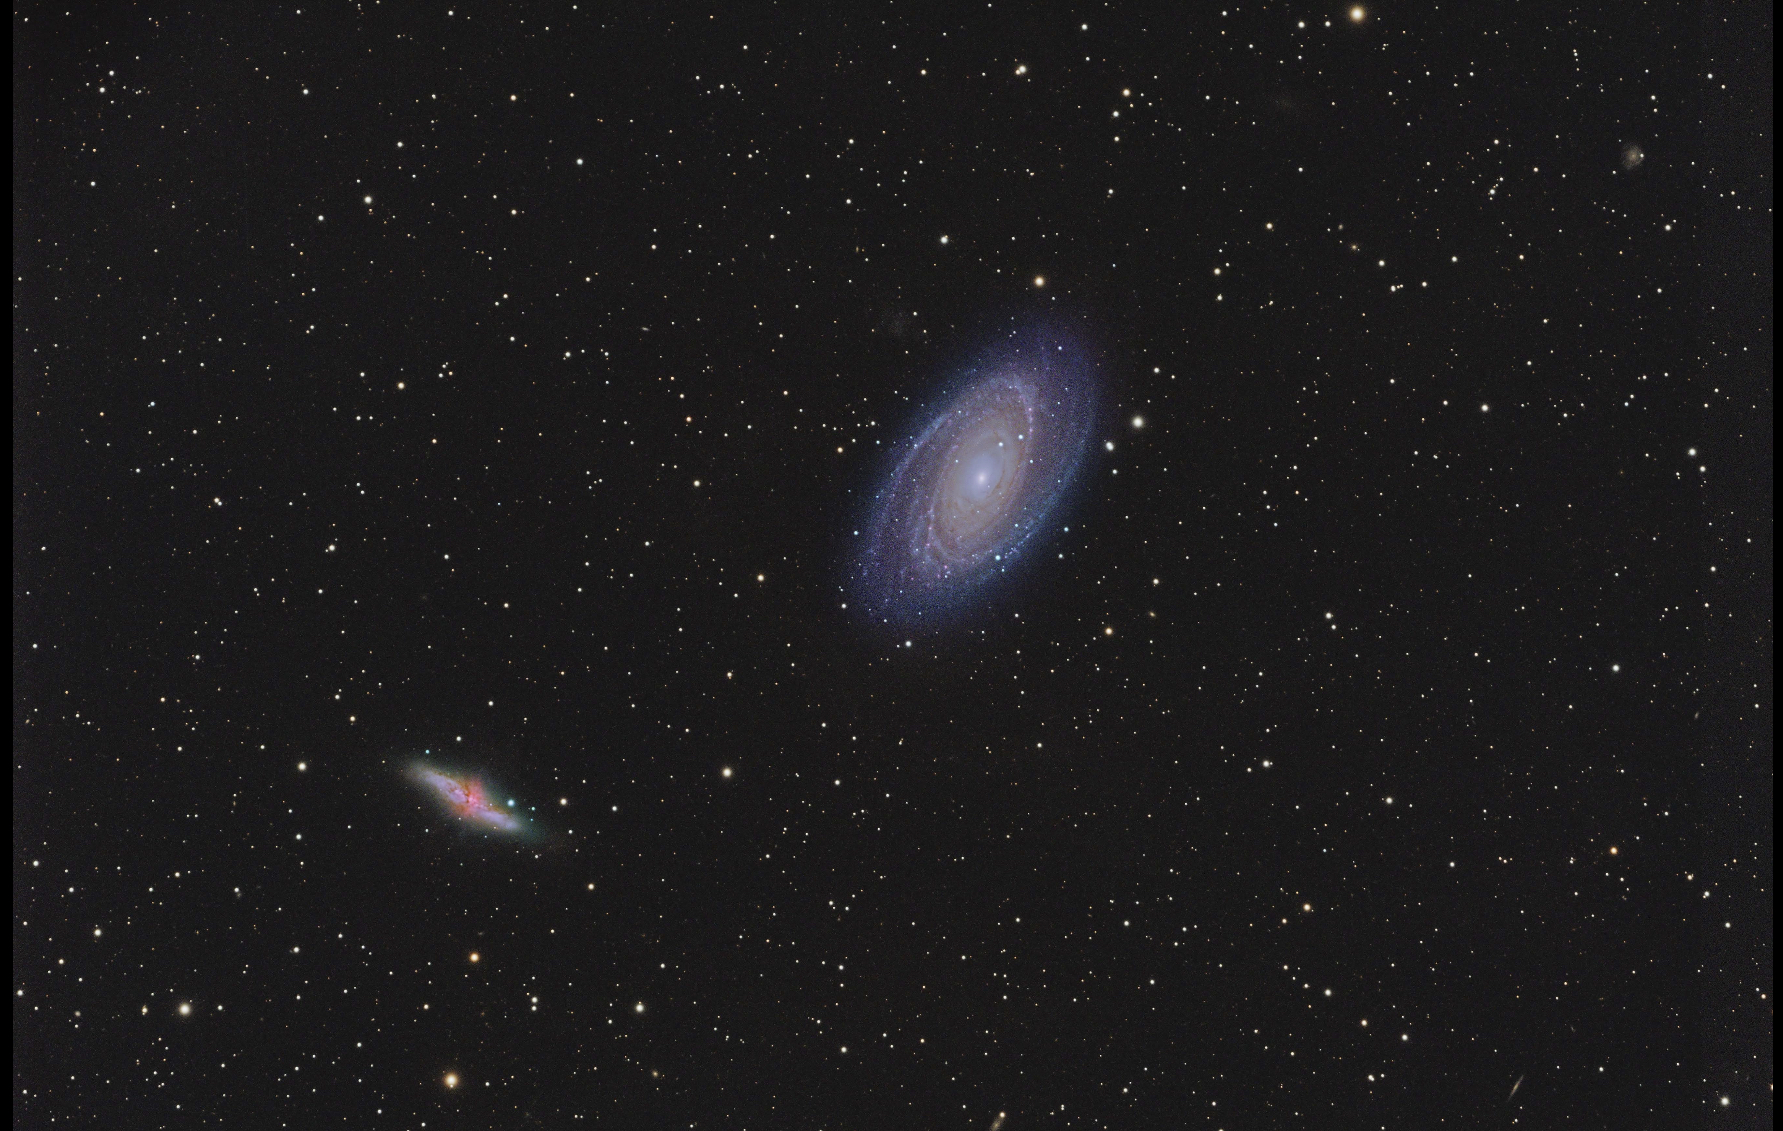 Galaxies M81 and M82.